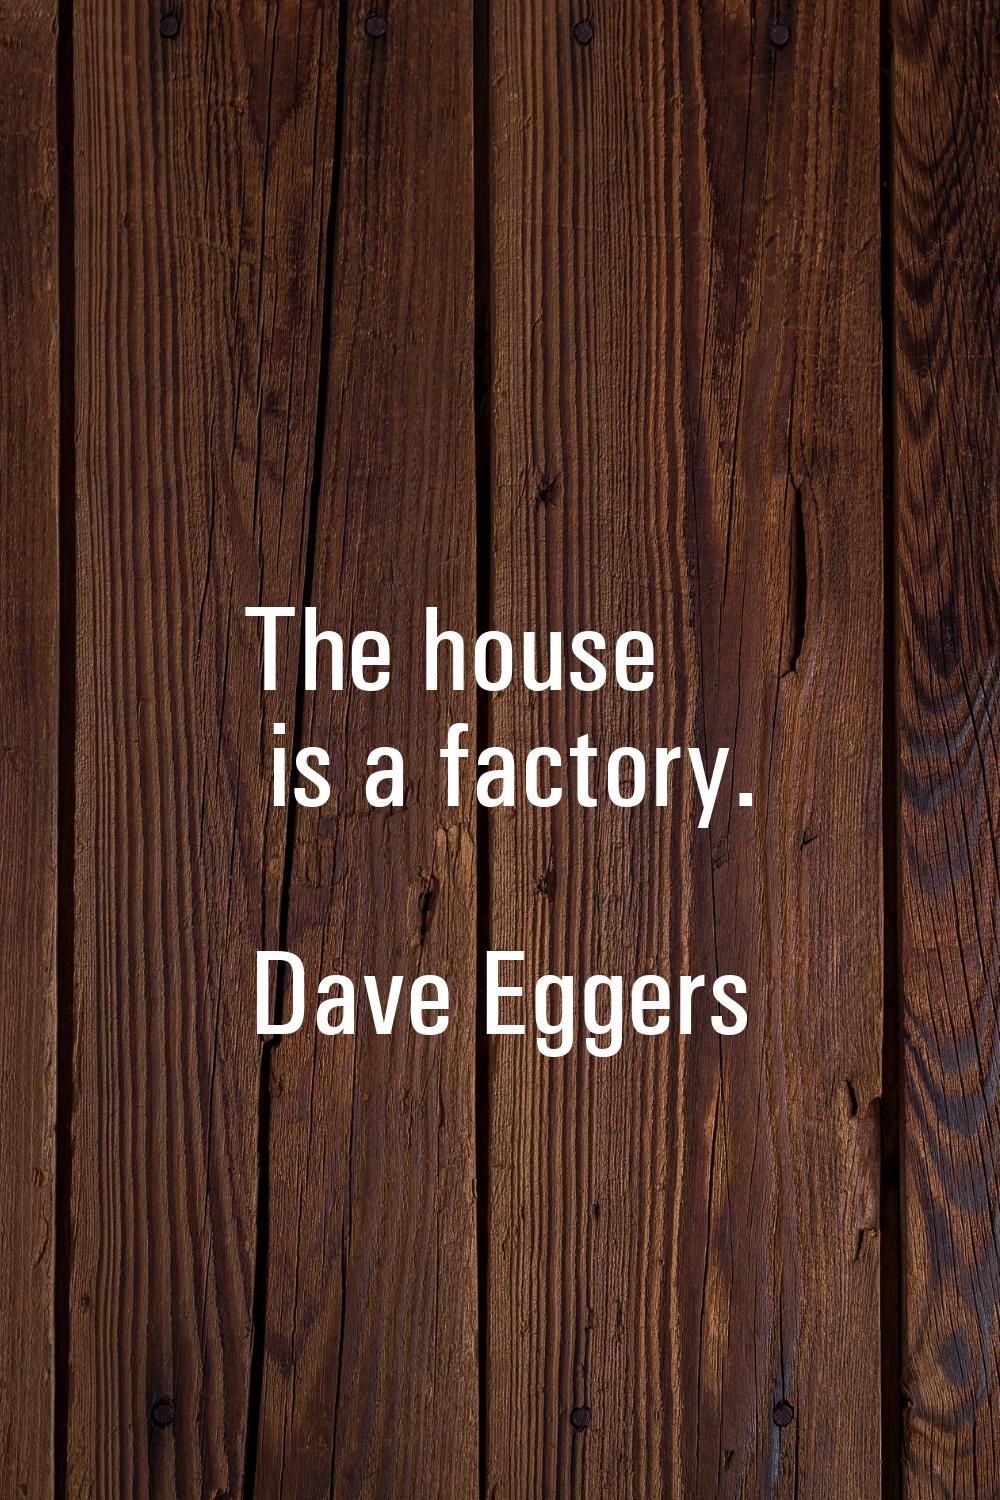 The house is a factory.